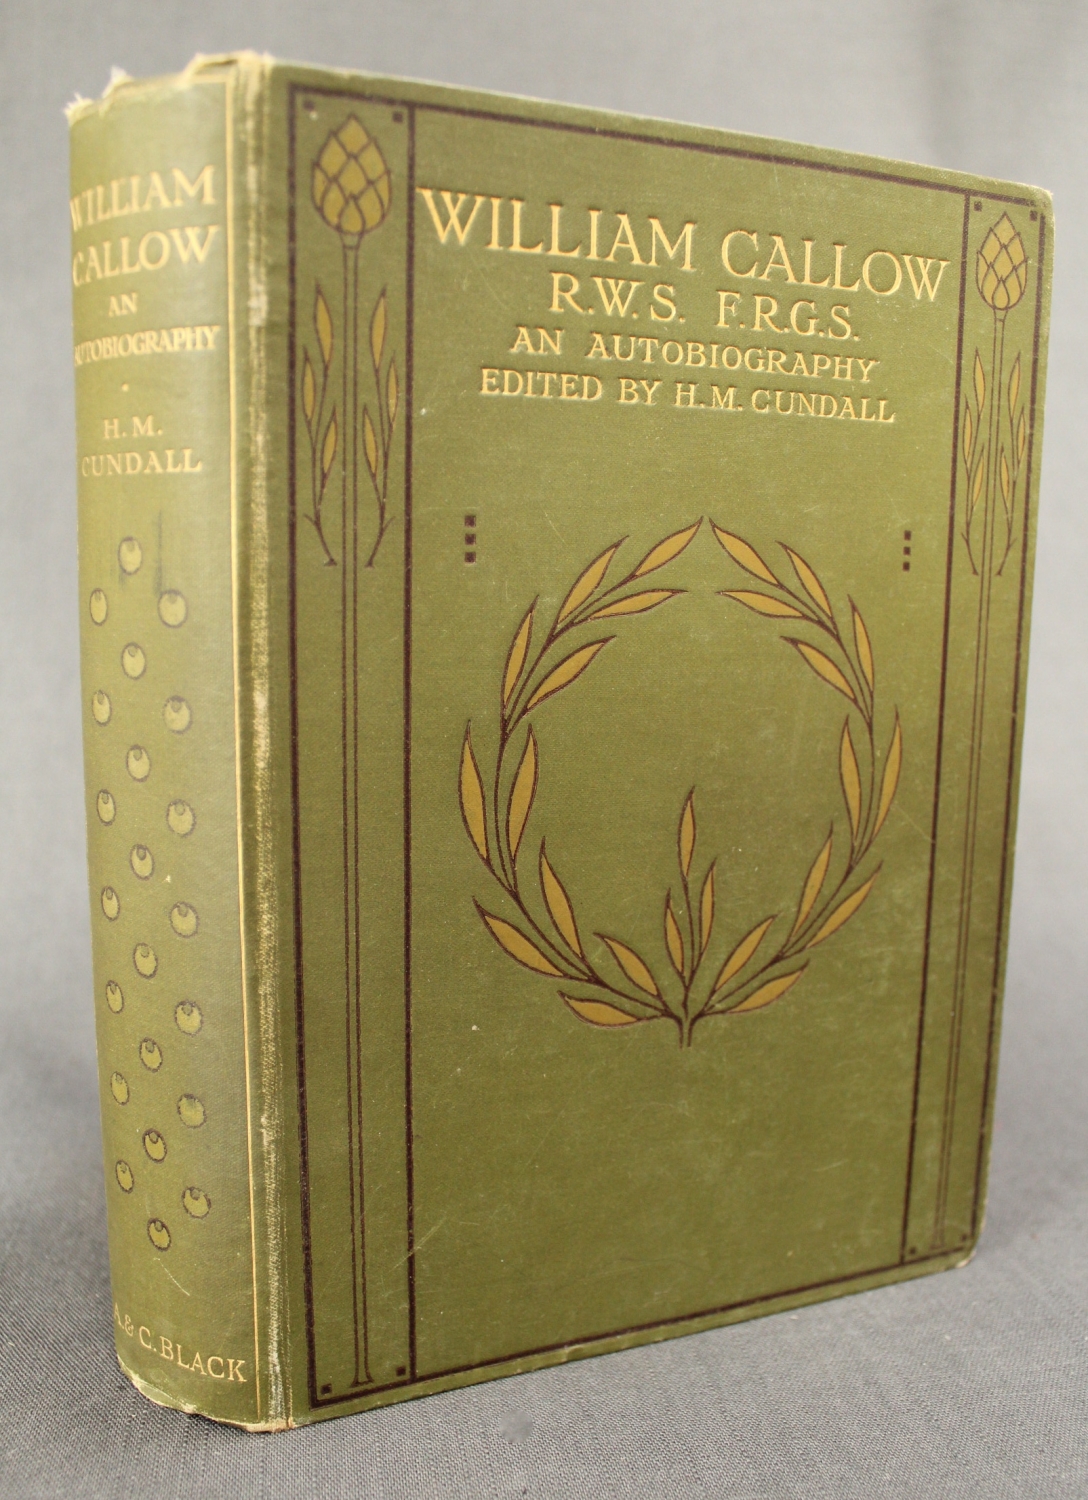 William Callow, An Autobiography